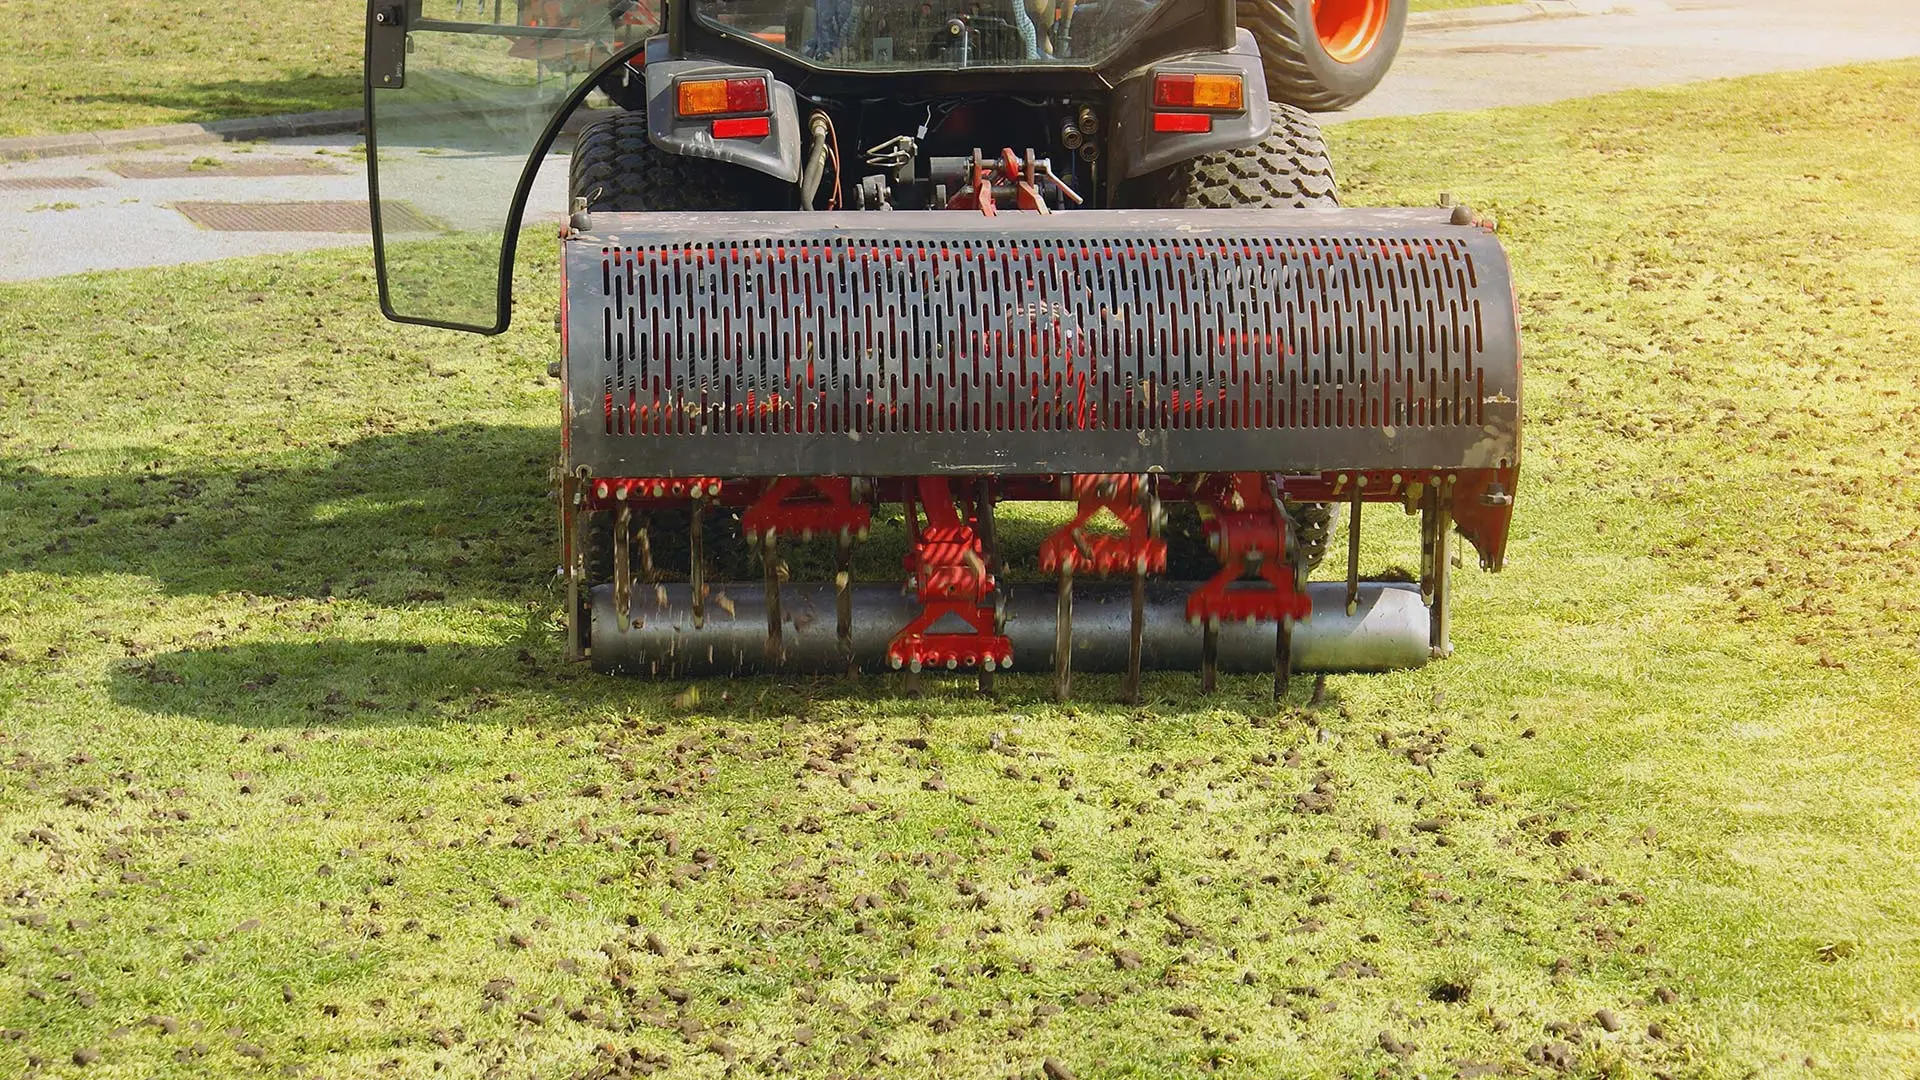 Our landscaper on a core aeration machine on a property in Downtown Memphis, TN.